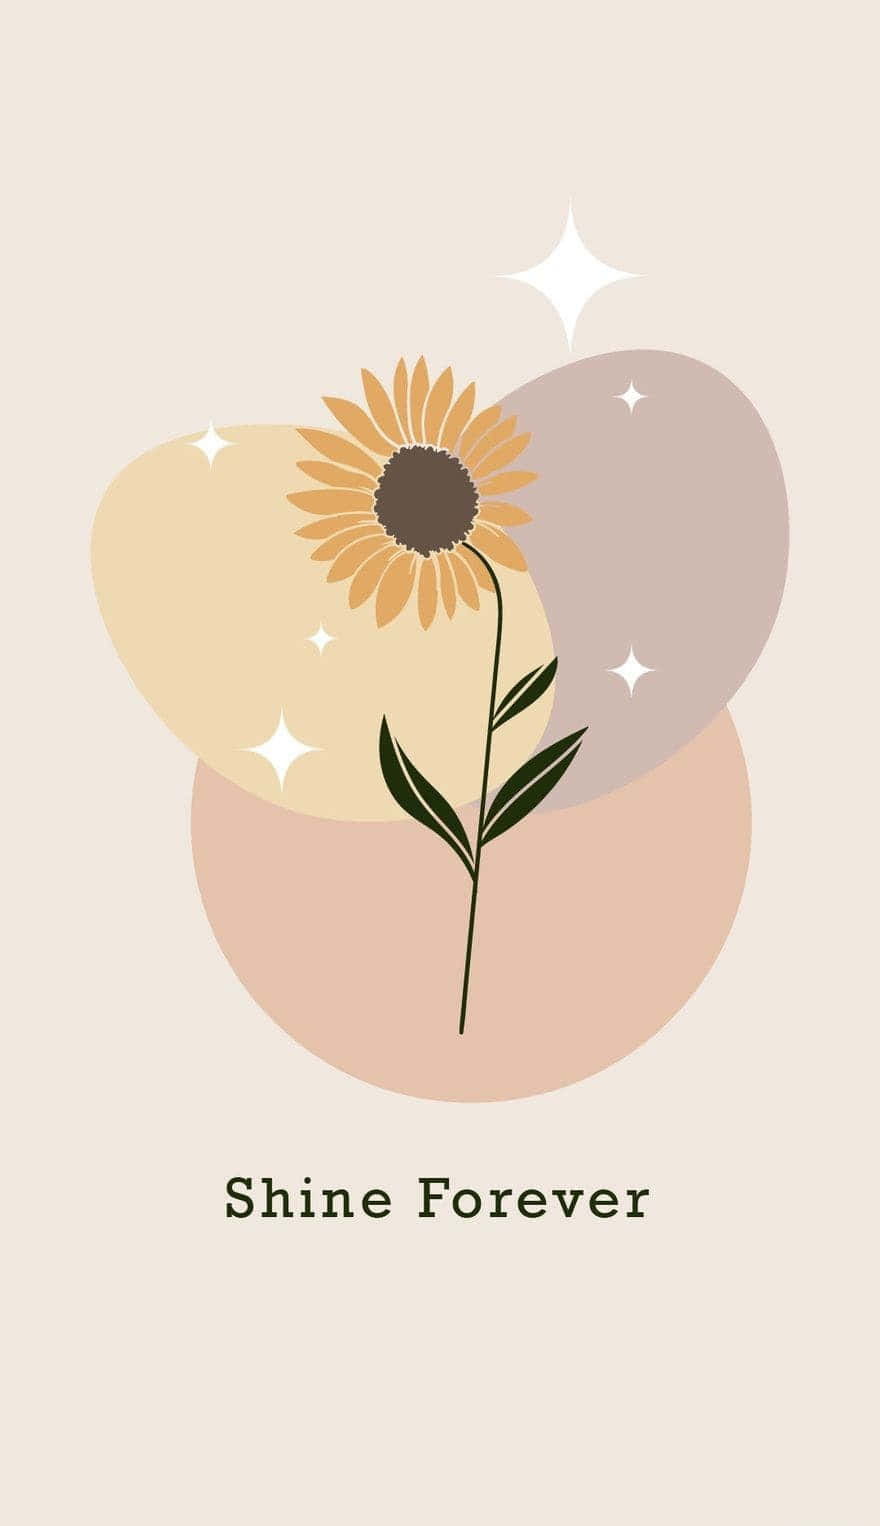 Shine Forever - A Sunflower With Stars